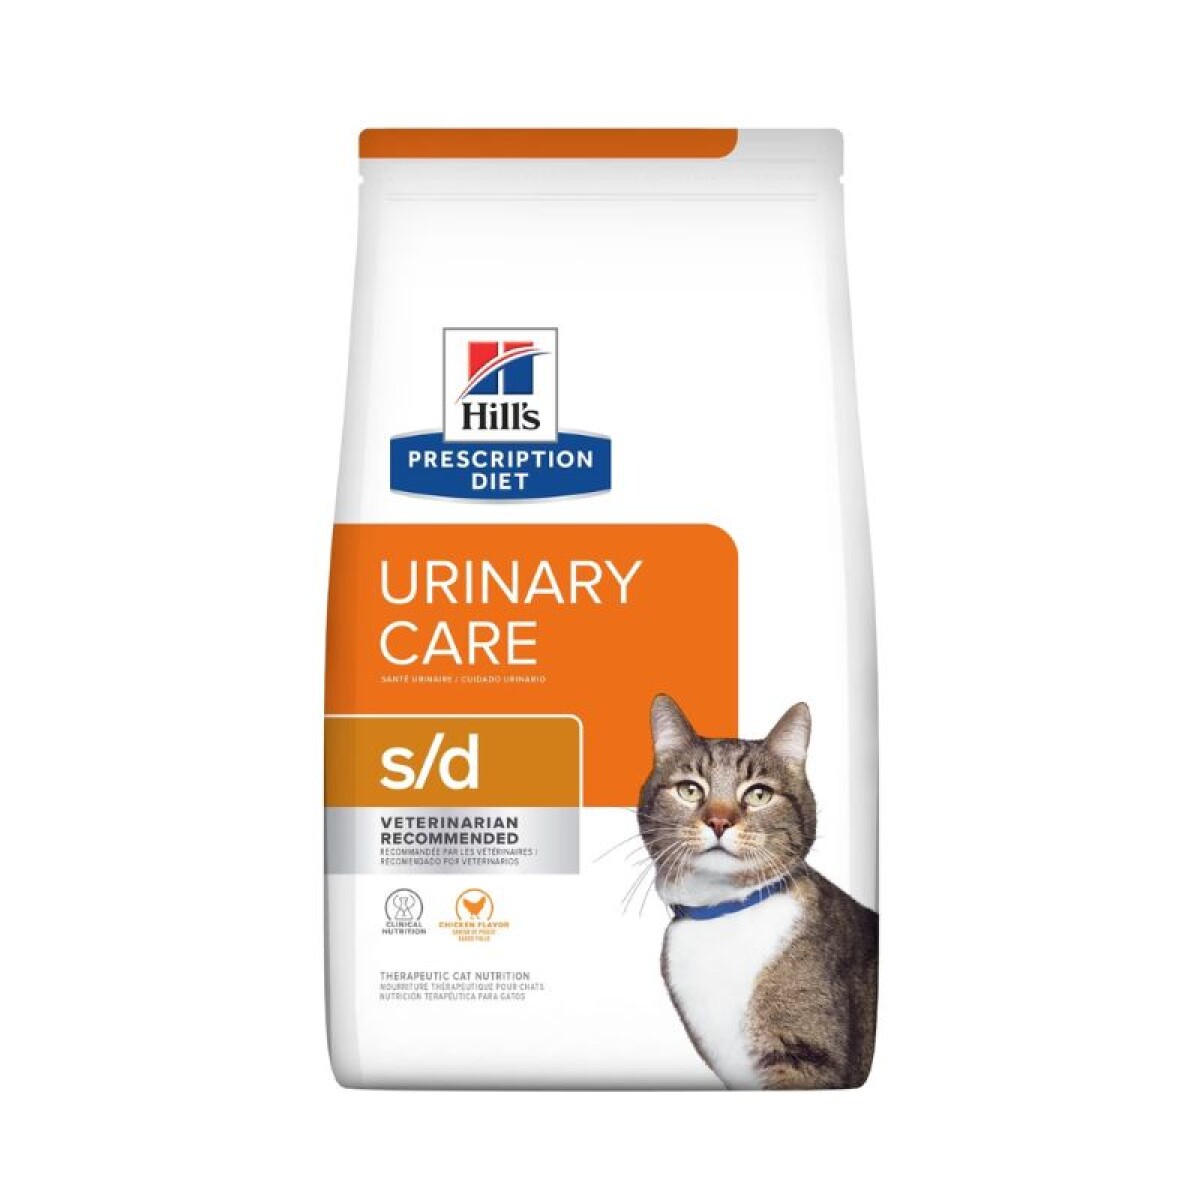 HILL´S S/D URINARY CARE CAT 1.8KG - Hill´s S/d Urinary Care Cat 1.8kg 